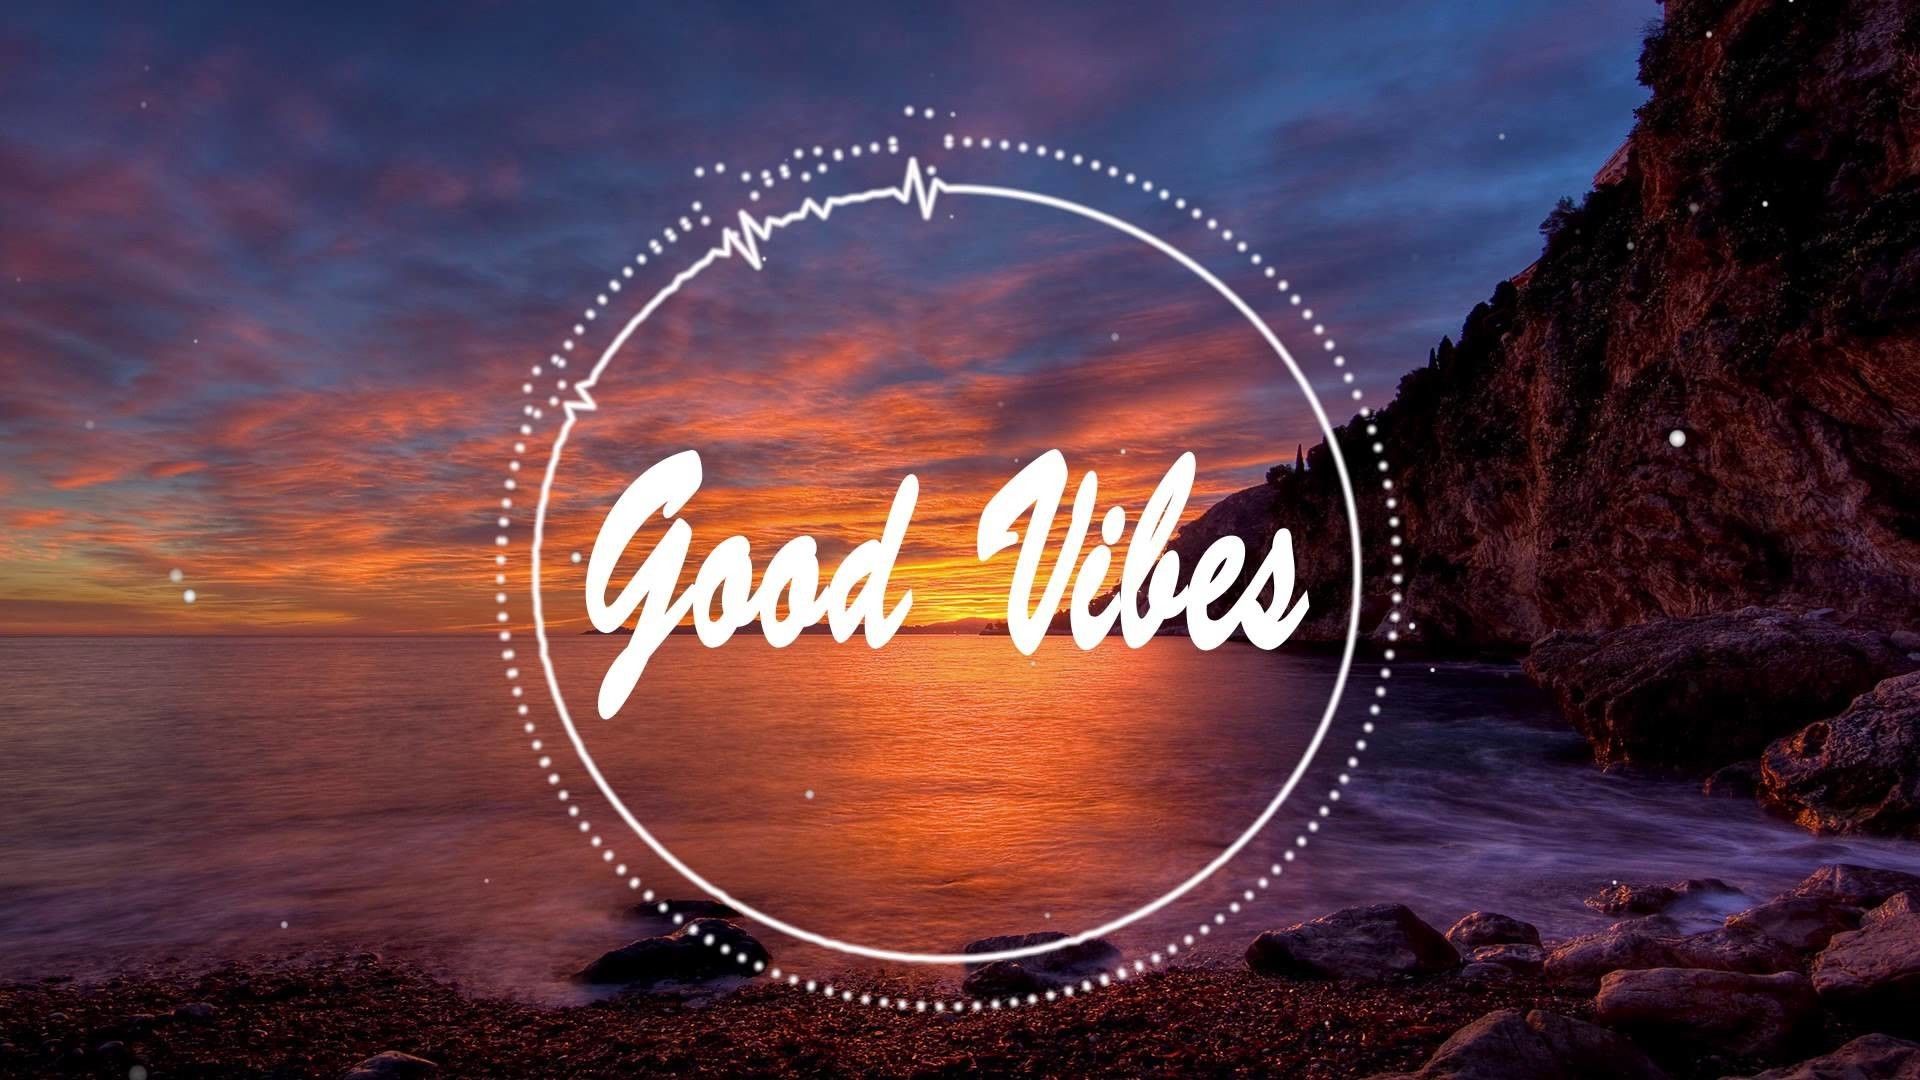 6845 Good Vibes Wallpaper Quotes Wallpaper and Ipod wallpaper   Android  iPhone HD Wallpaper Background Download HD Wallpapers Desktop  Background  Android  iPhone 1080p 4k 1080x1919 2023